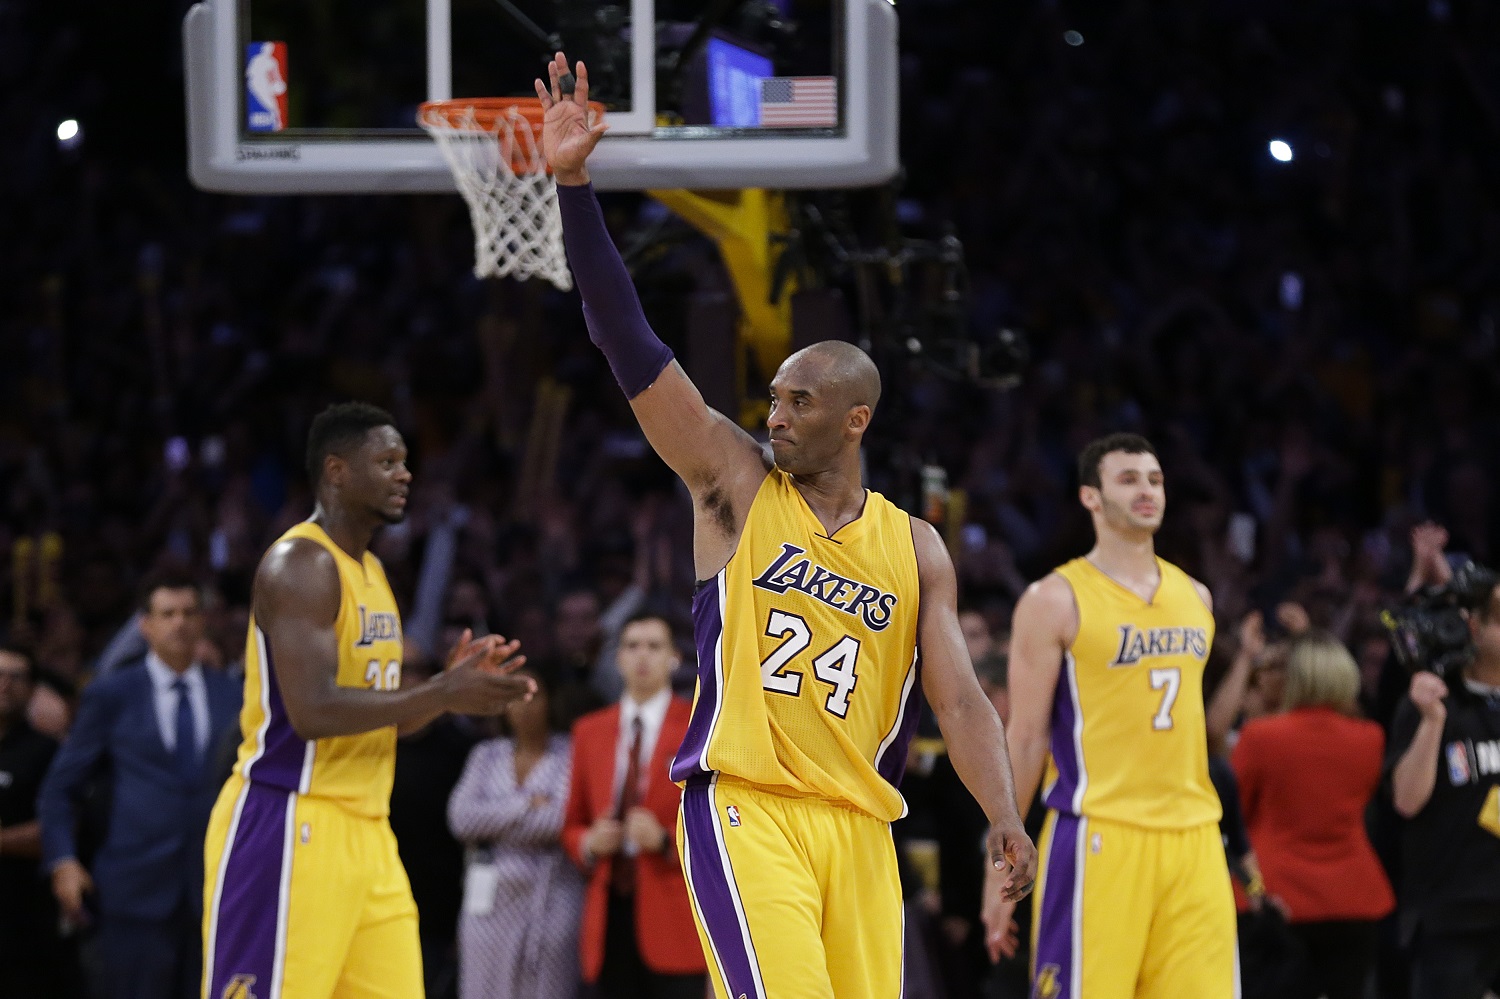 Los Angeles Lakers' Kobe Bryant acknowledges the fans after the last NBA basketball game of his career, against the Utah Jazz on Wednesday, April 13, 2016, in Los Angeles. Bryant scored 60 points as the Lakers won 101-96. (AP Photo/Jae C. Hong)